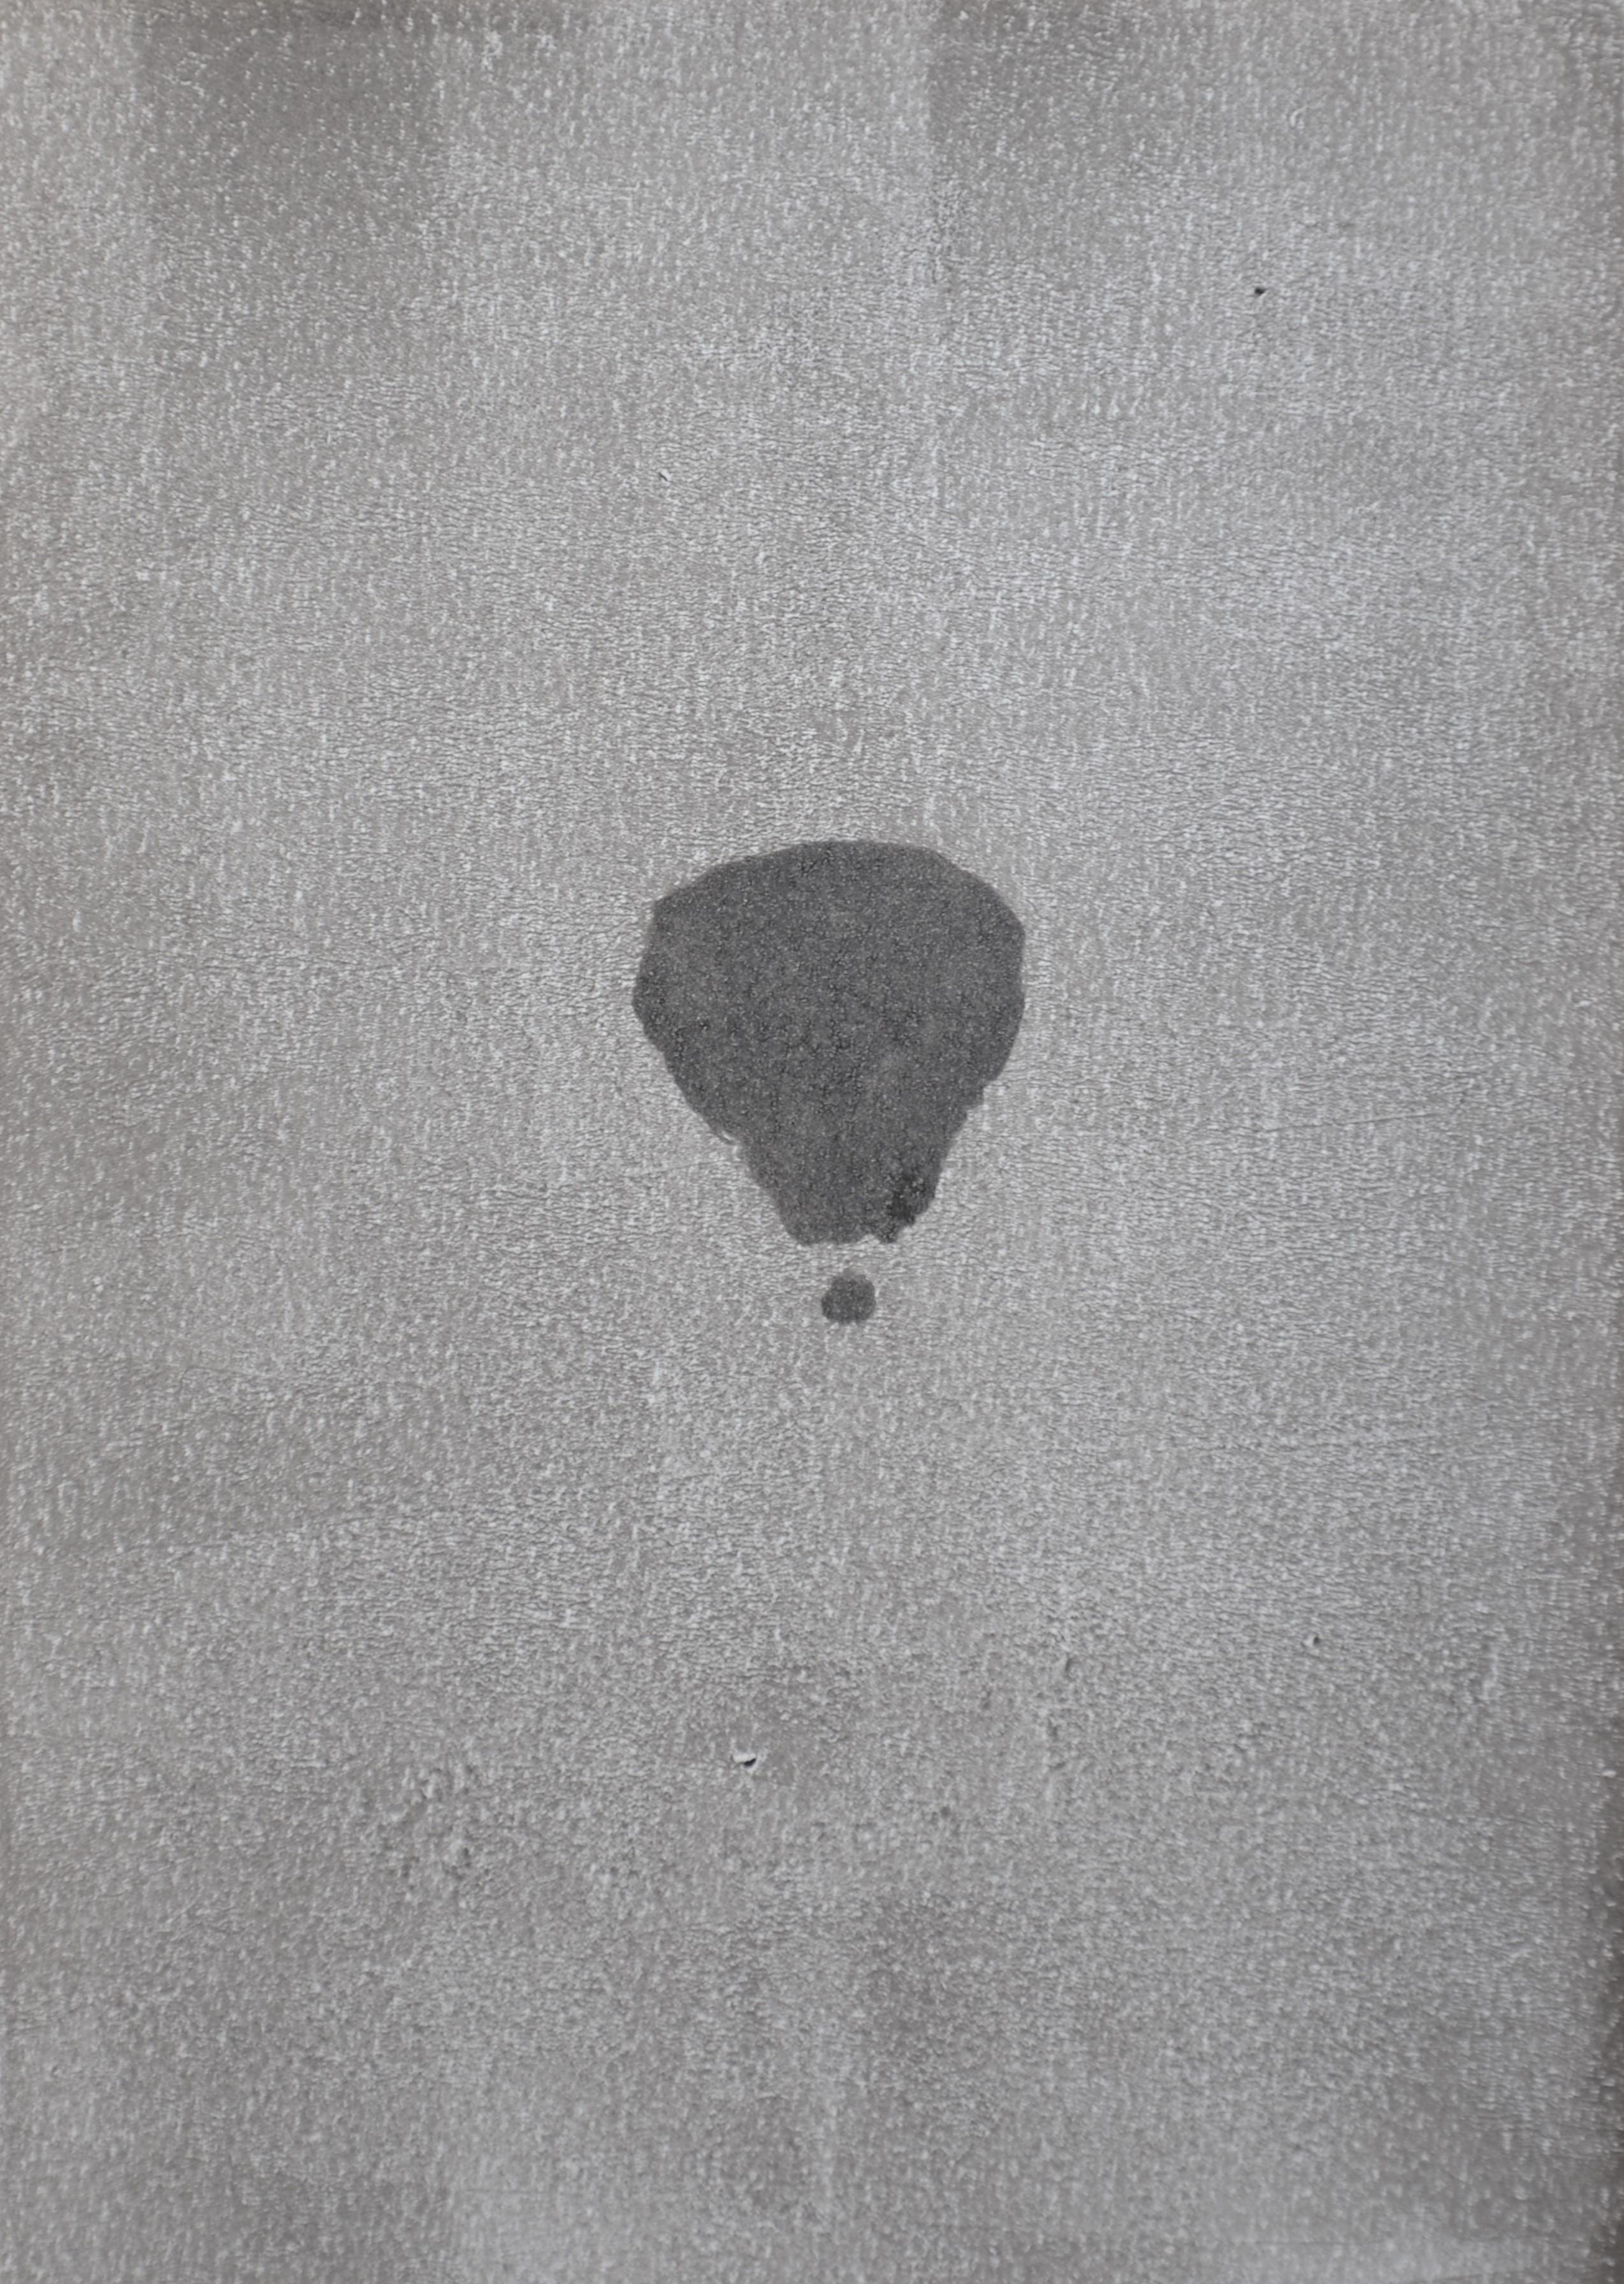 Artist Jasper Hagenaar made unique monotypes. The monoprints are works in black acrylic paint pressed on paper (21 x 29,5 cm) based upon previous paintings. This a a work of a hot air balloon in the sky. Signed on the back.

Over the last decade